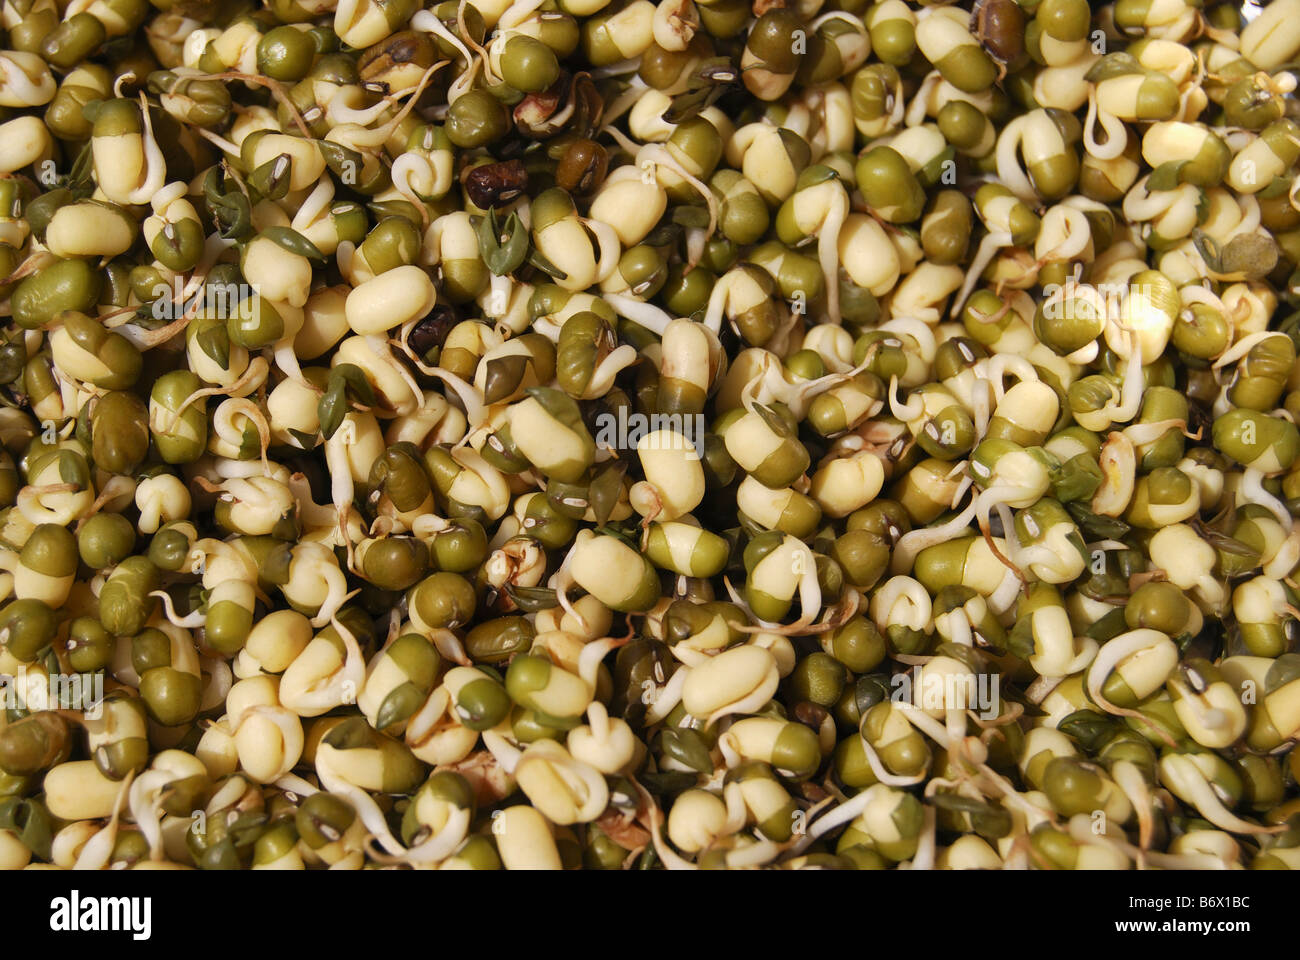 Sprouted green Moong. Stock Photo